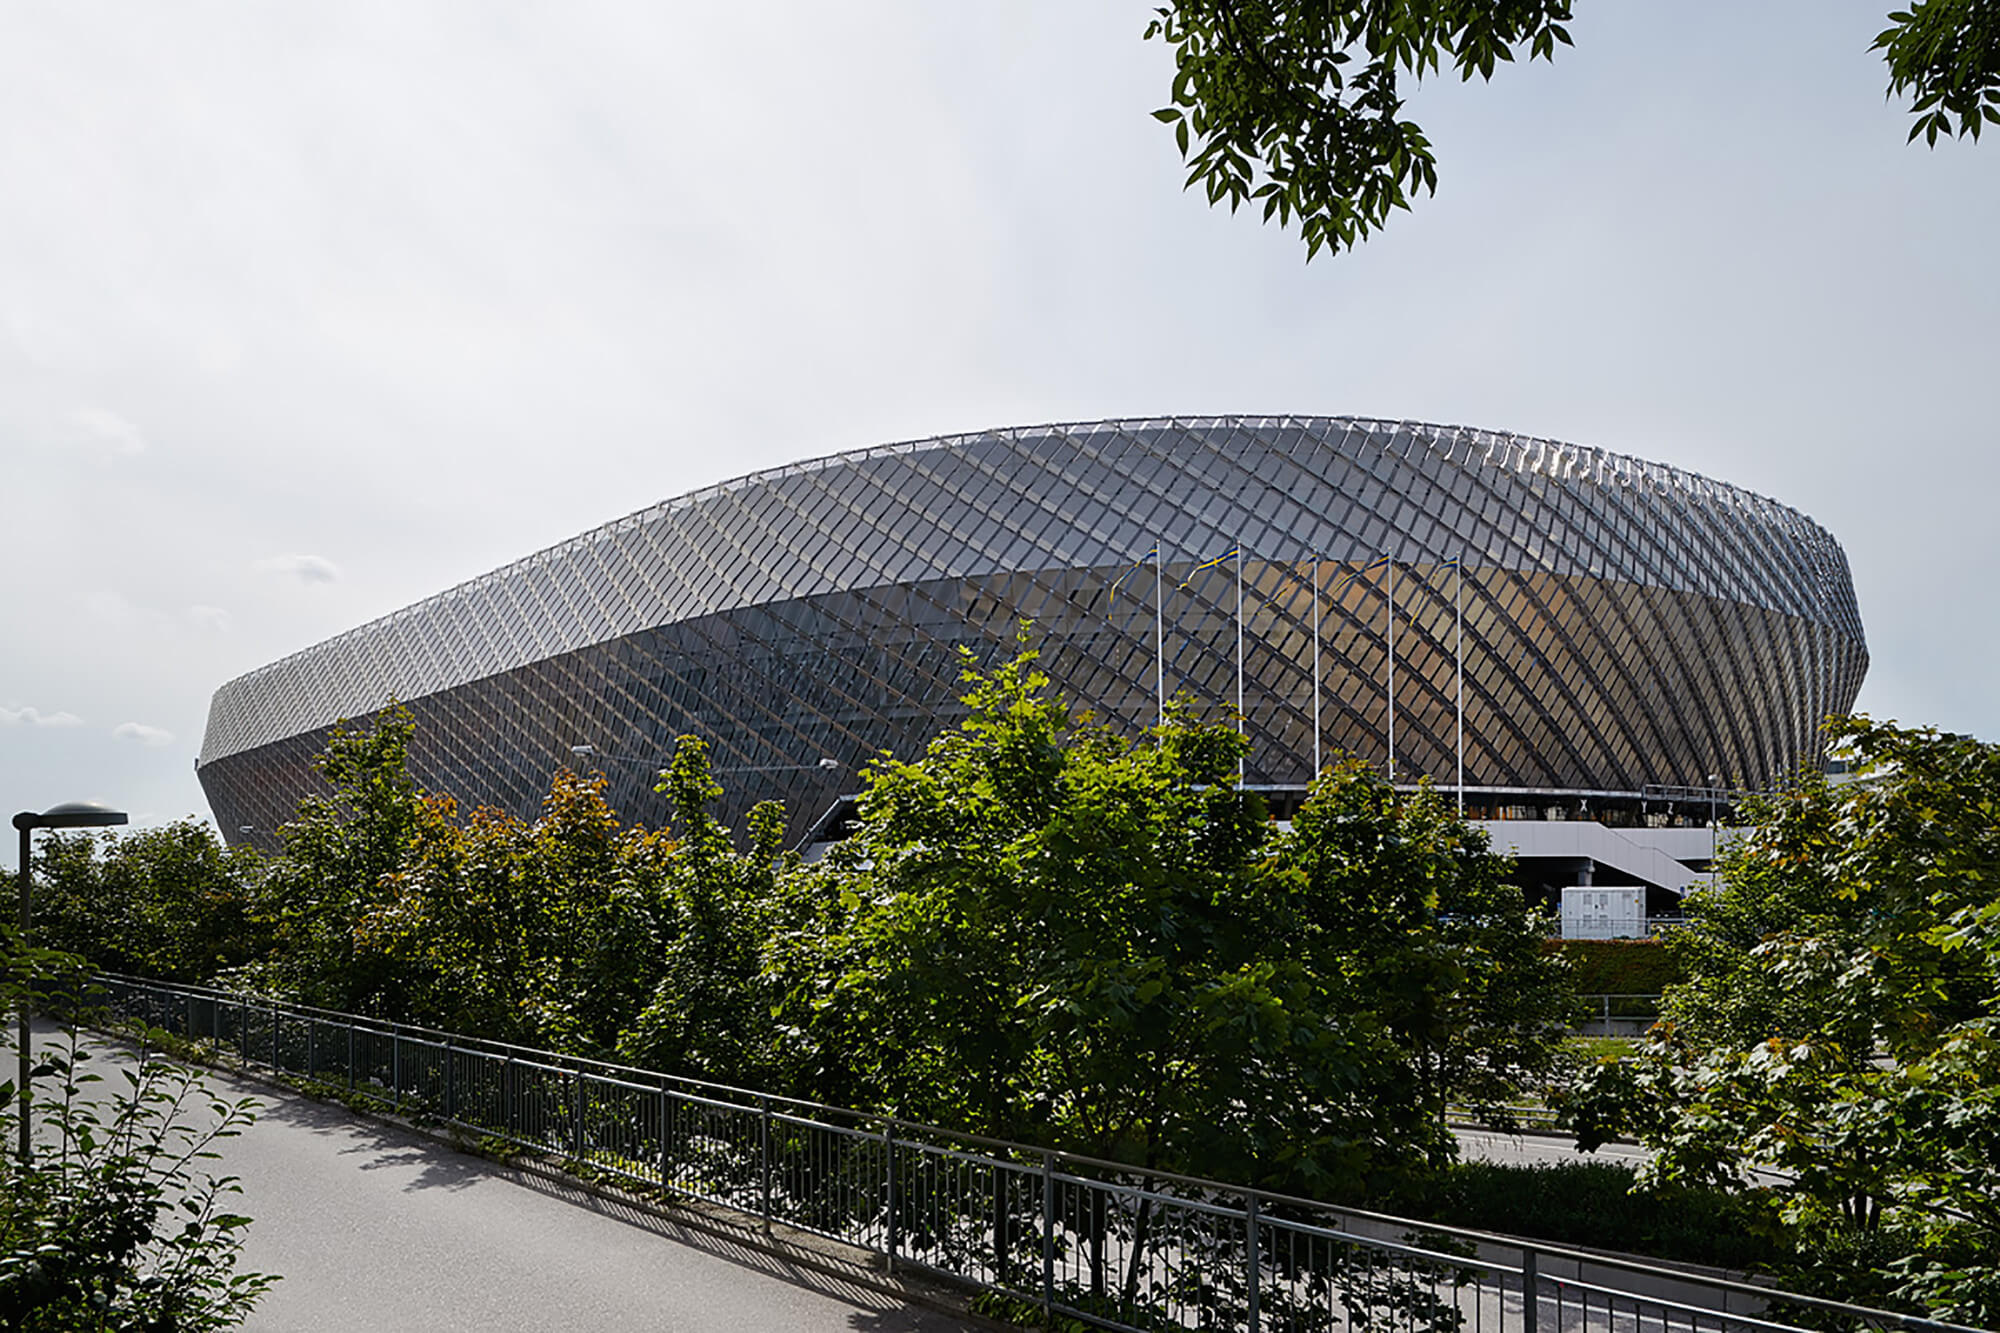 the Tele2 Arena with expanded metal surface